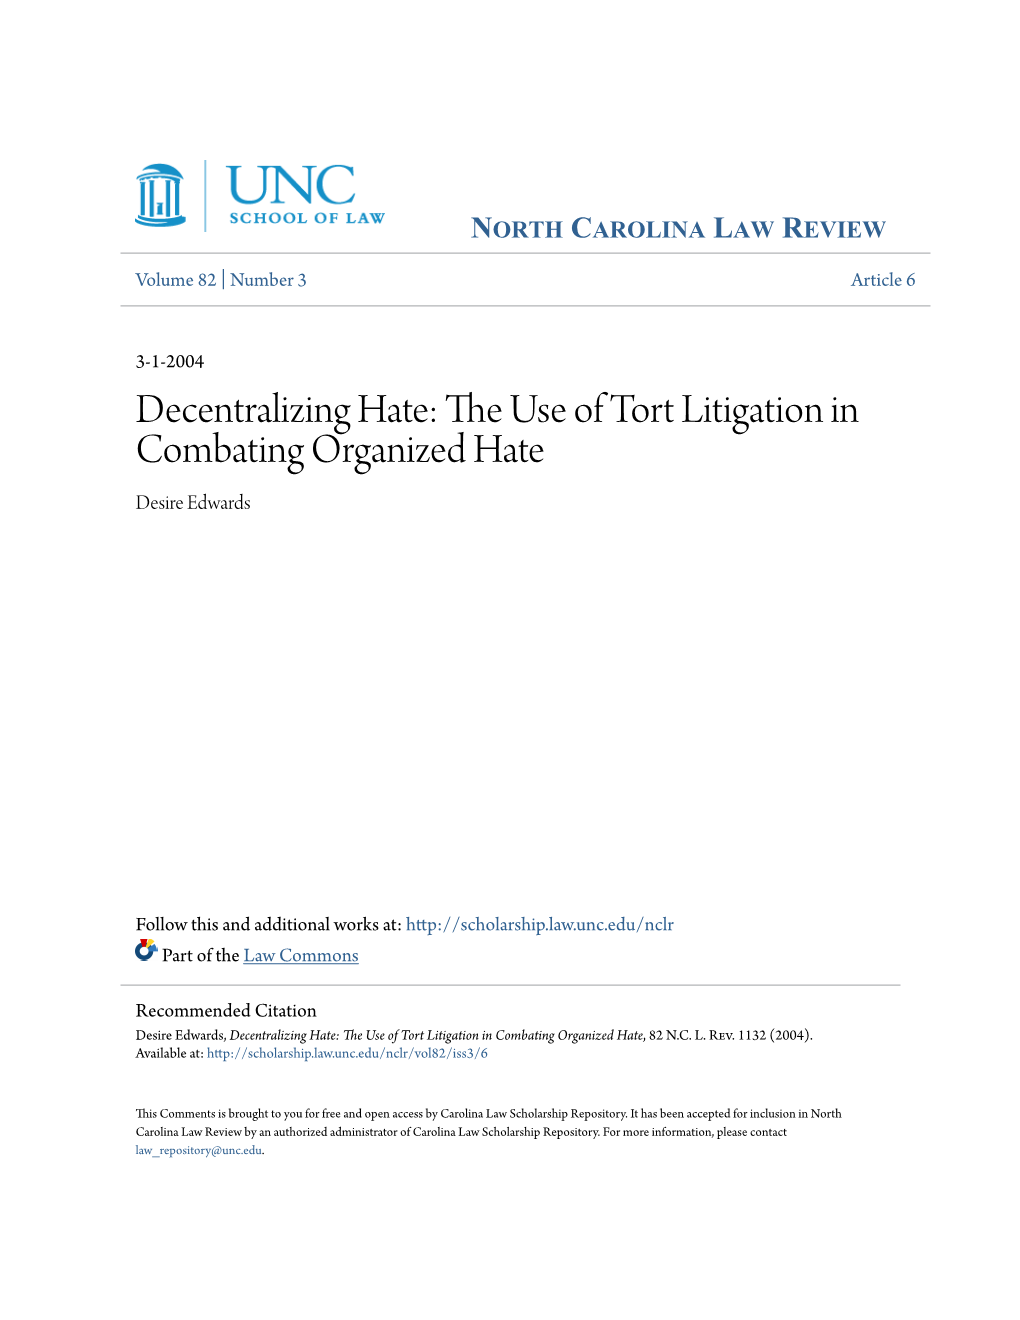 Decentralizing Hate: the Use of Tort Litigation in Combating Organized Hate, 82 N.C